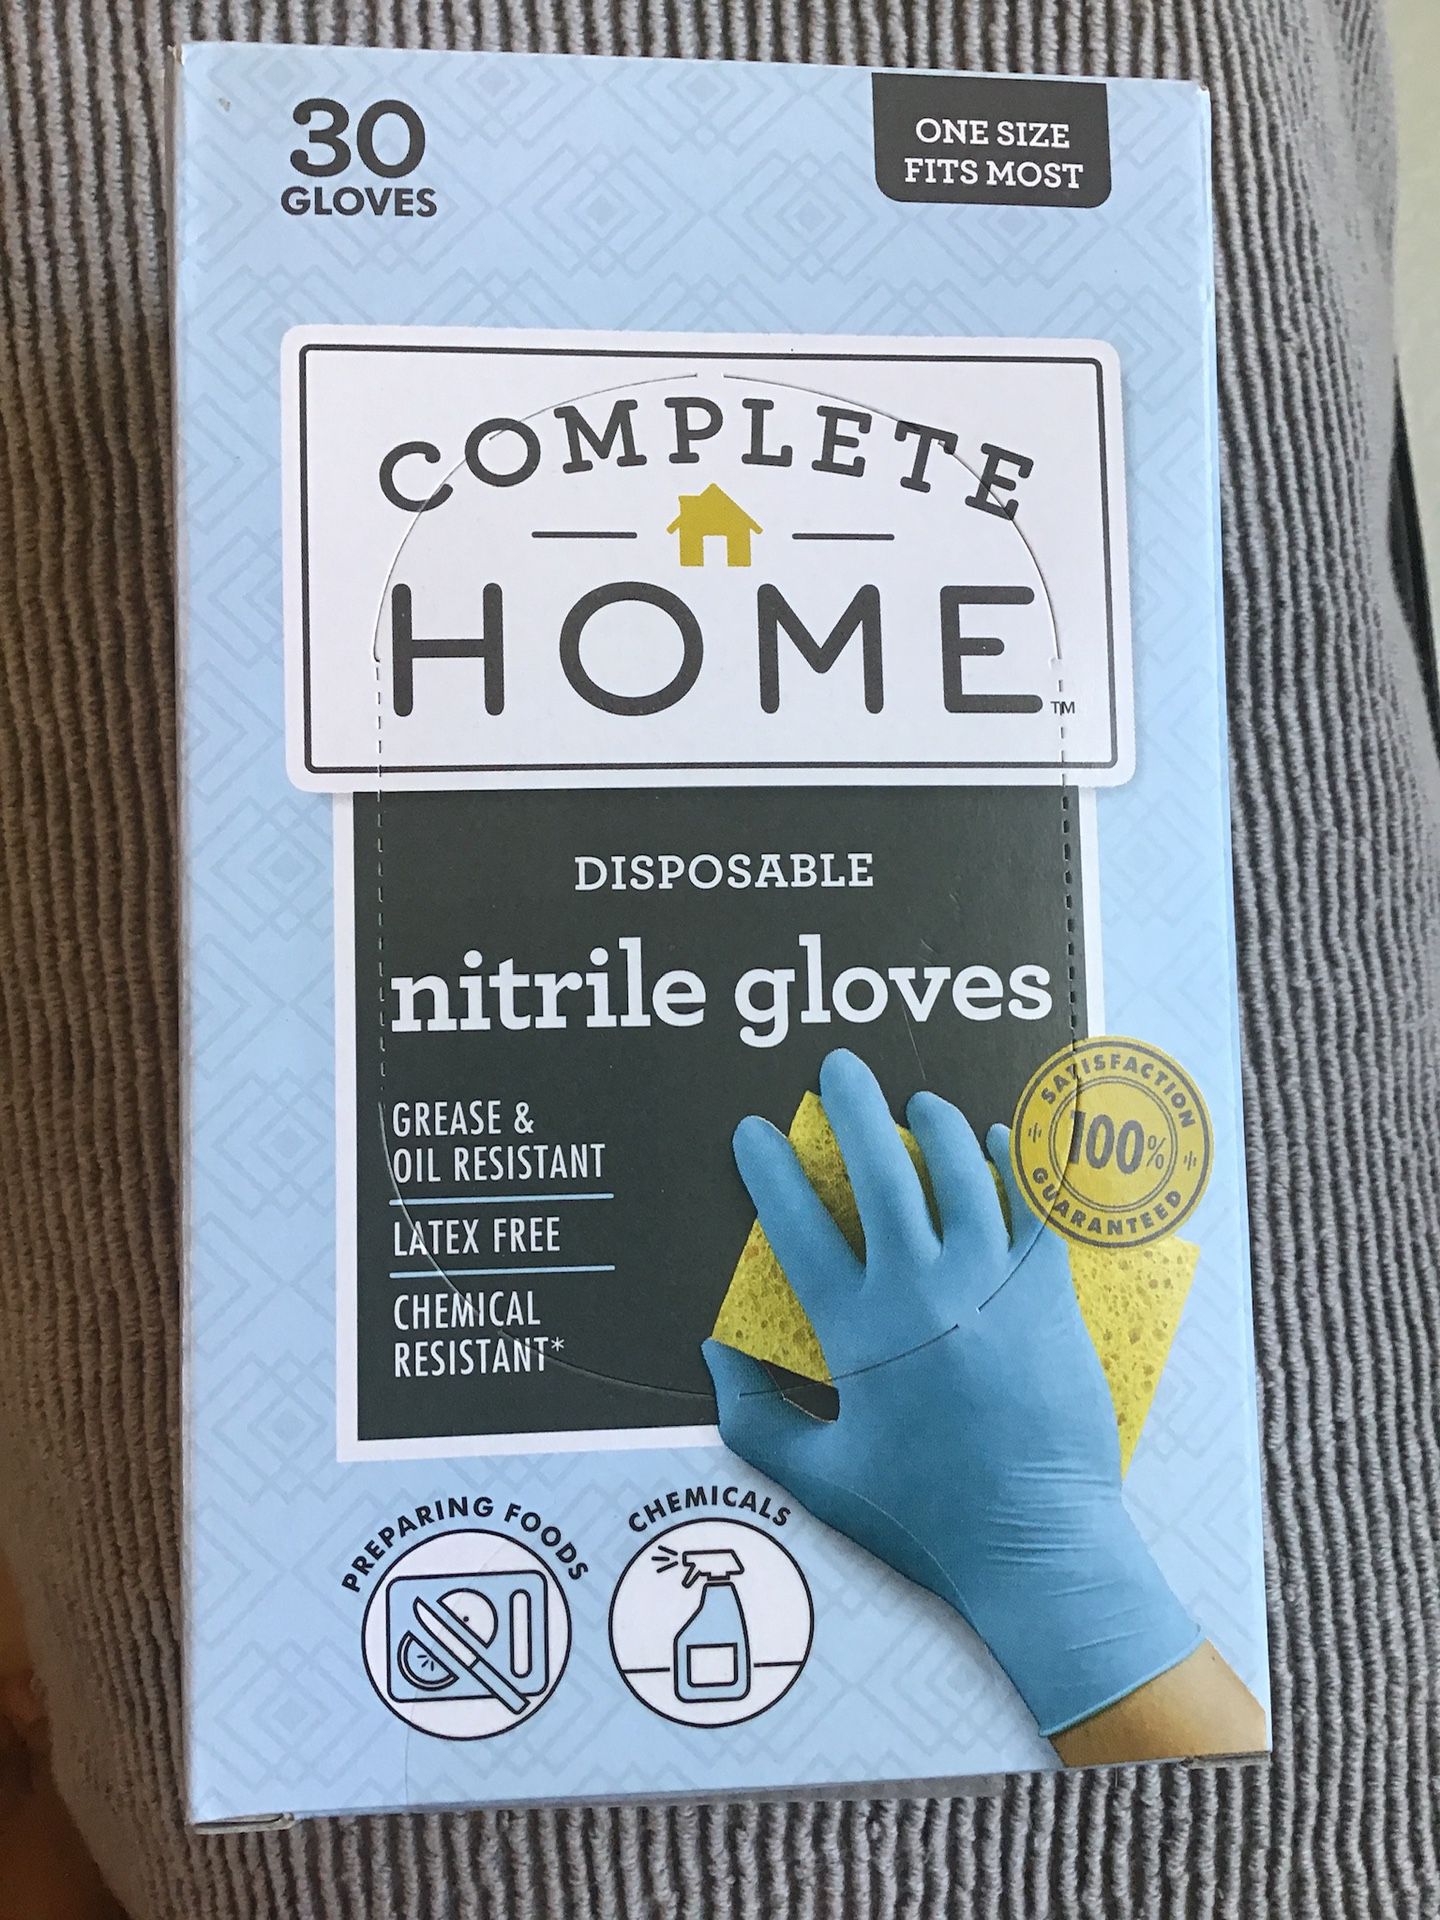 Nitrile gloves 30ct boxes 3 boxes =90 gloves latex free